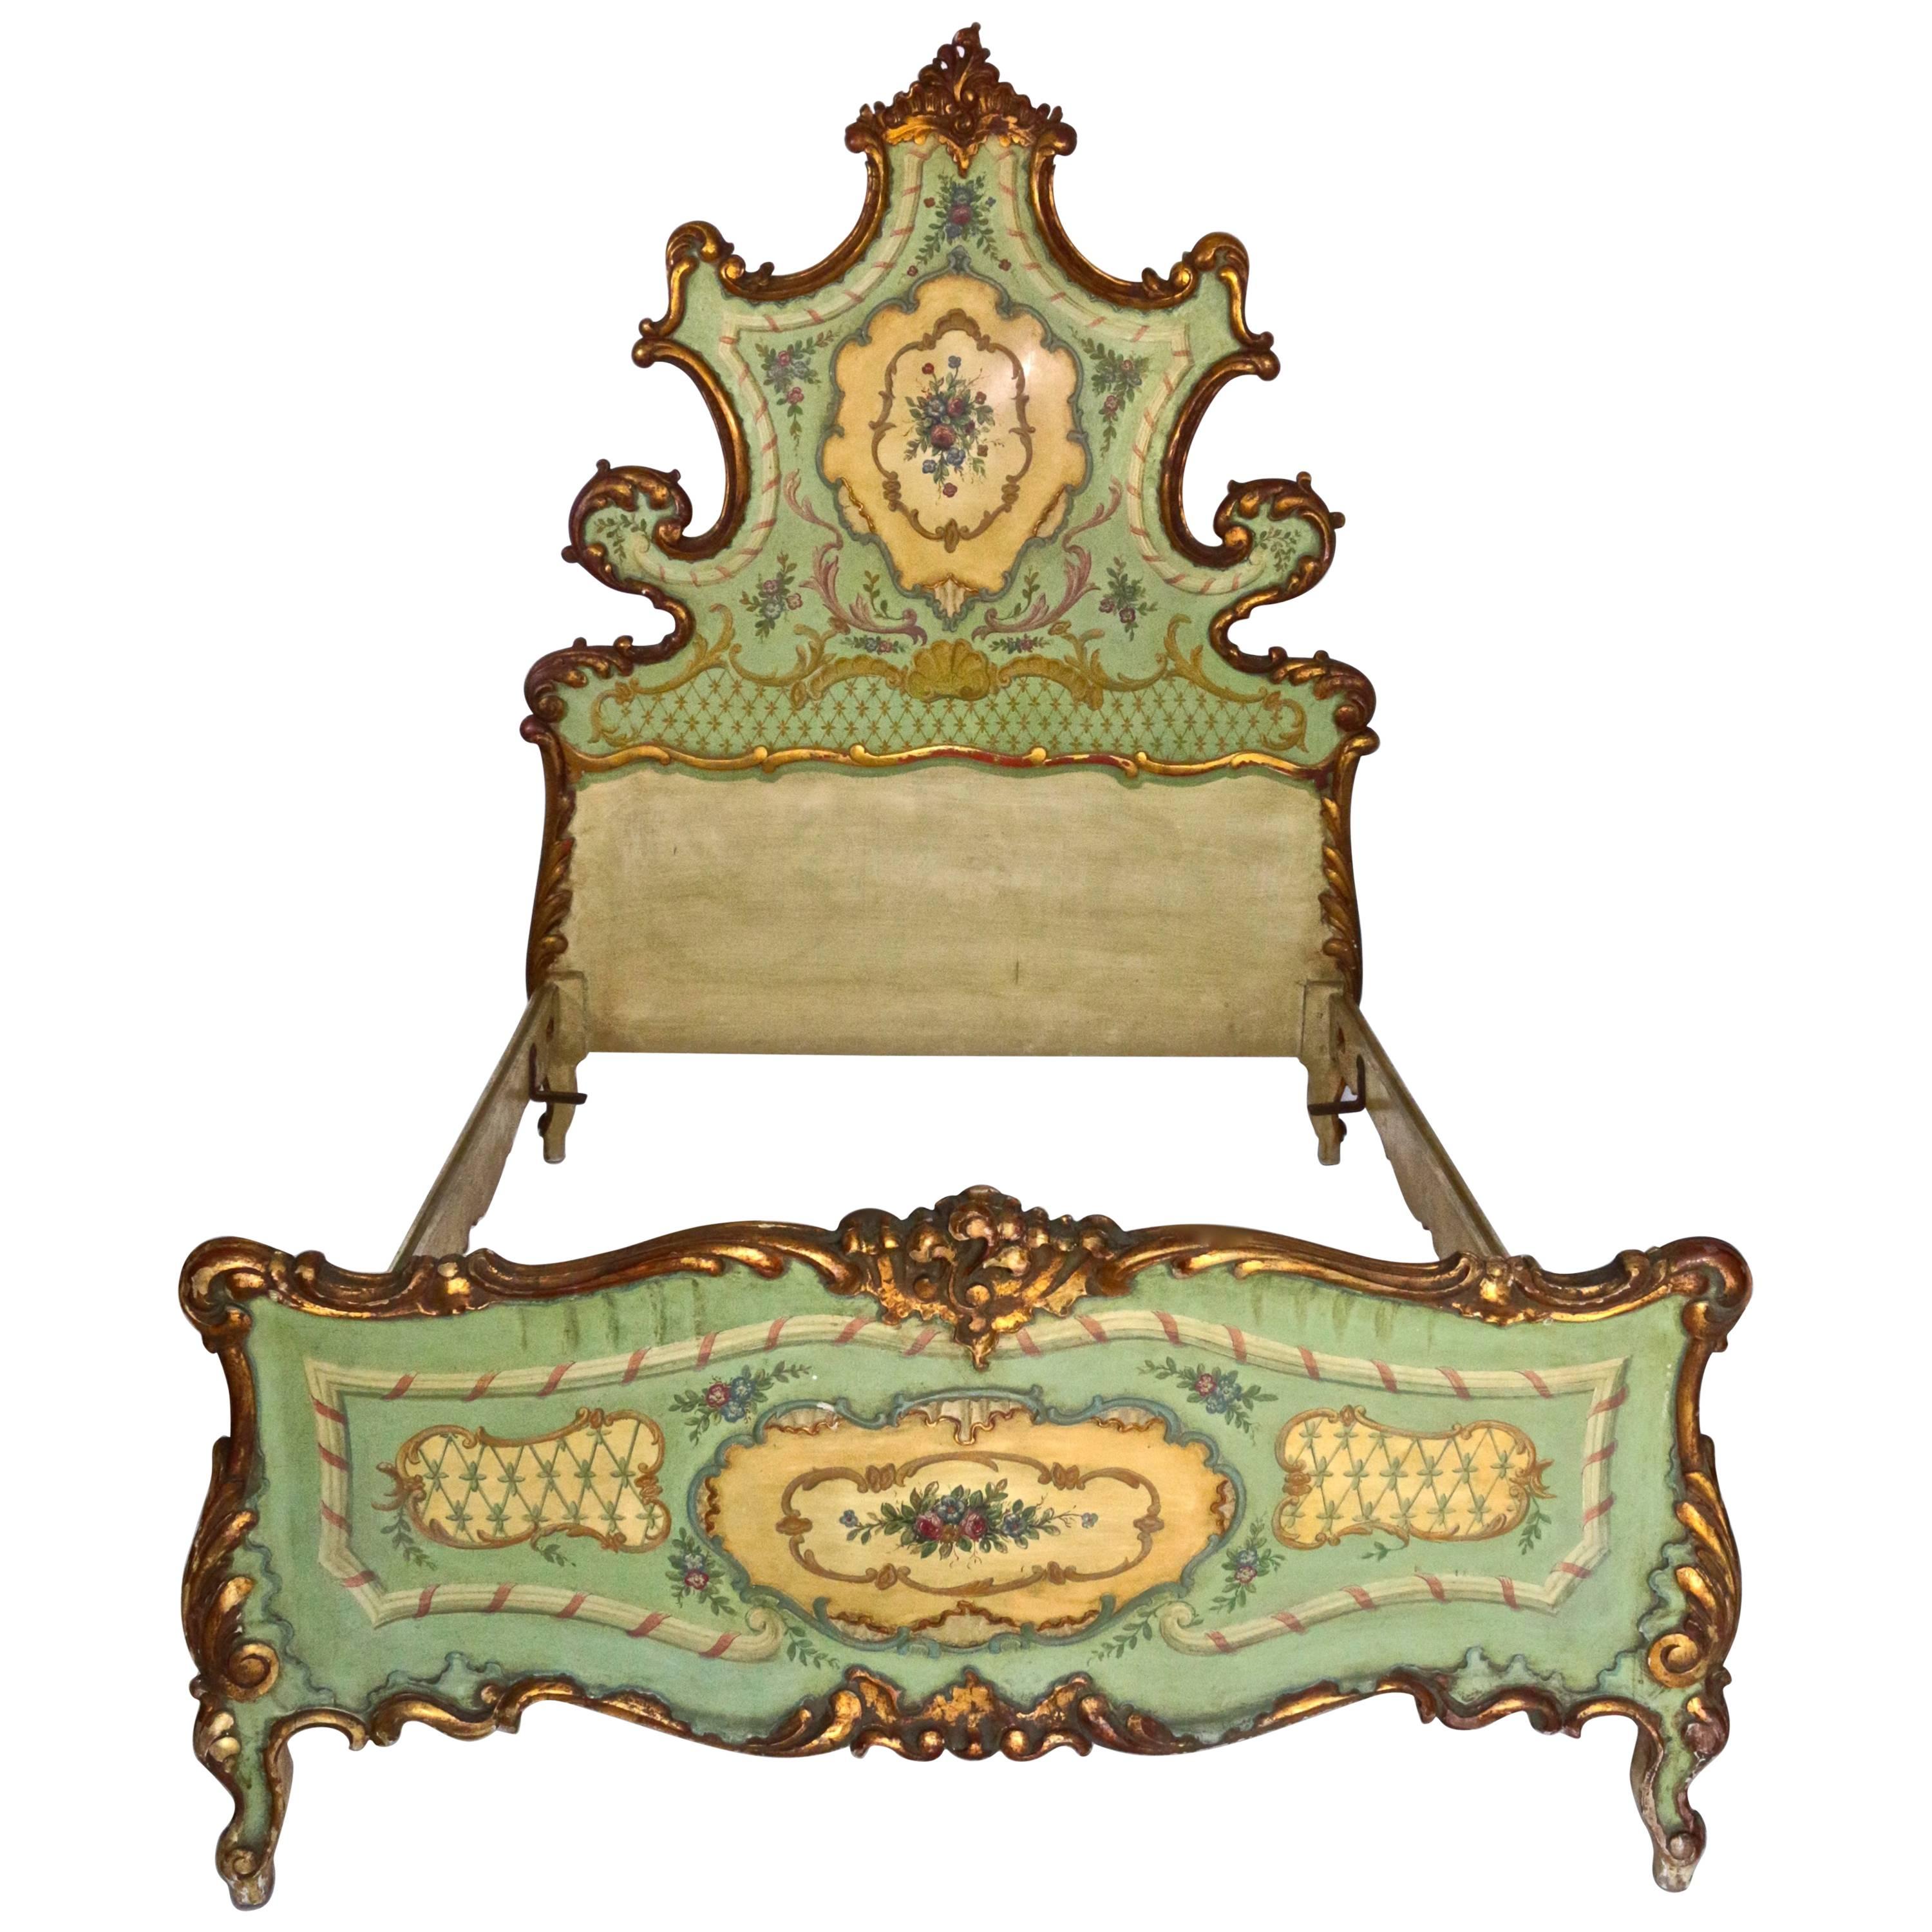 19th Century Hand-Painted Venetian Bed